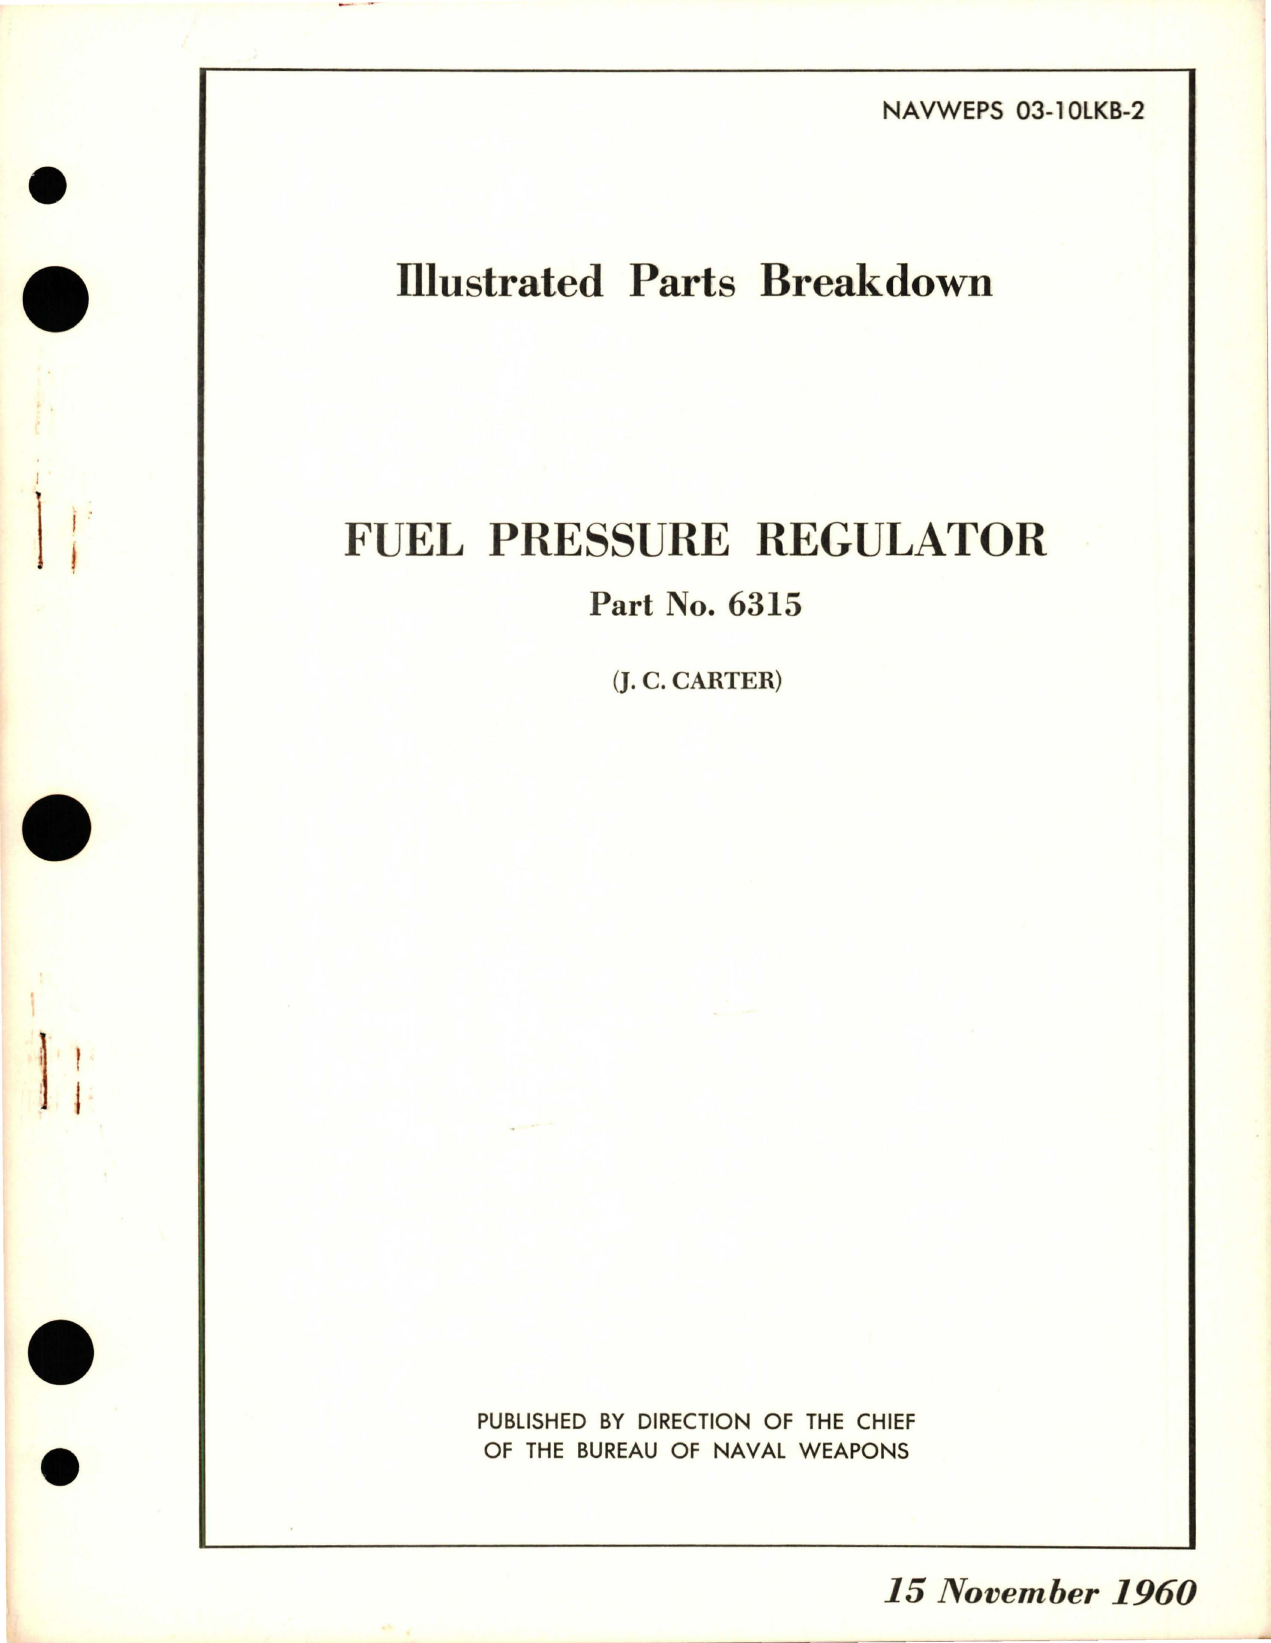 Sample page 1 from AirCorps Library document: Illustrated Parts Breakdown for Fuel Pressure Regulator - Part 6315